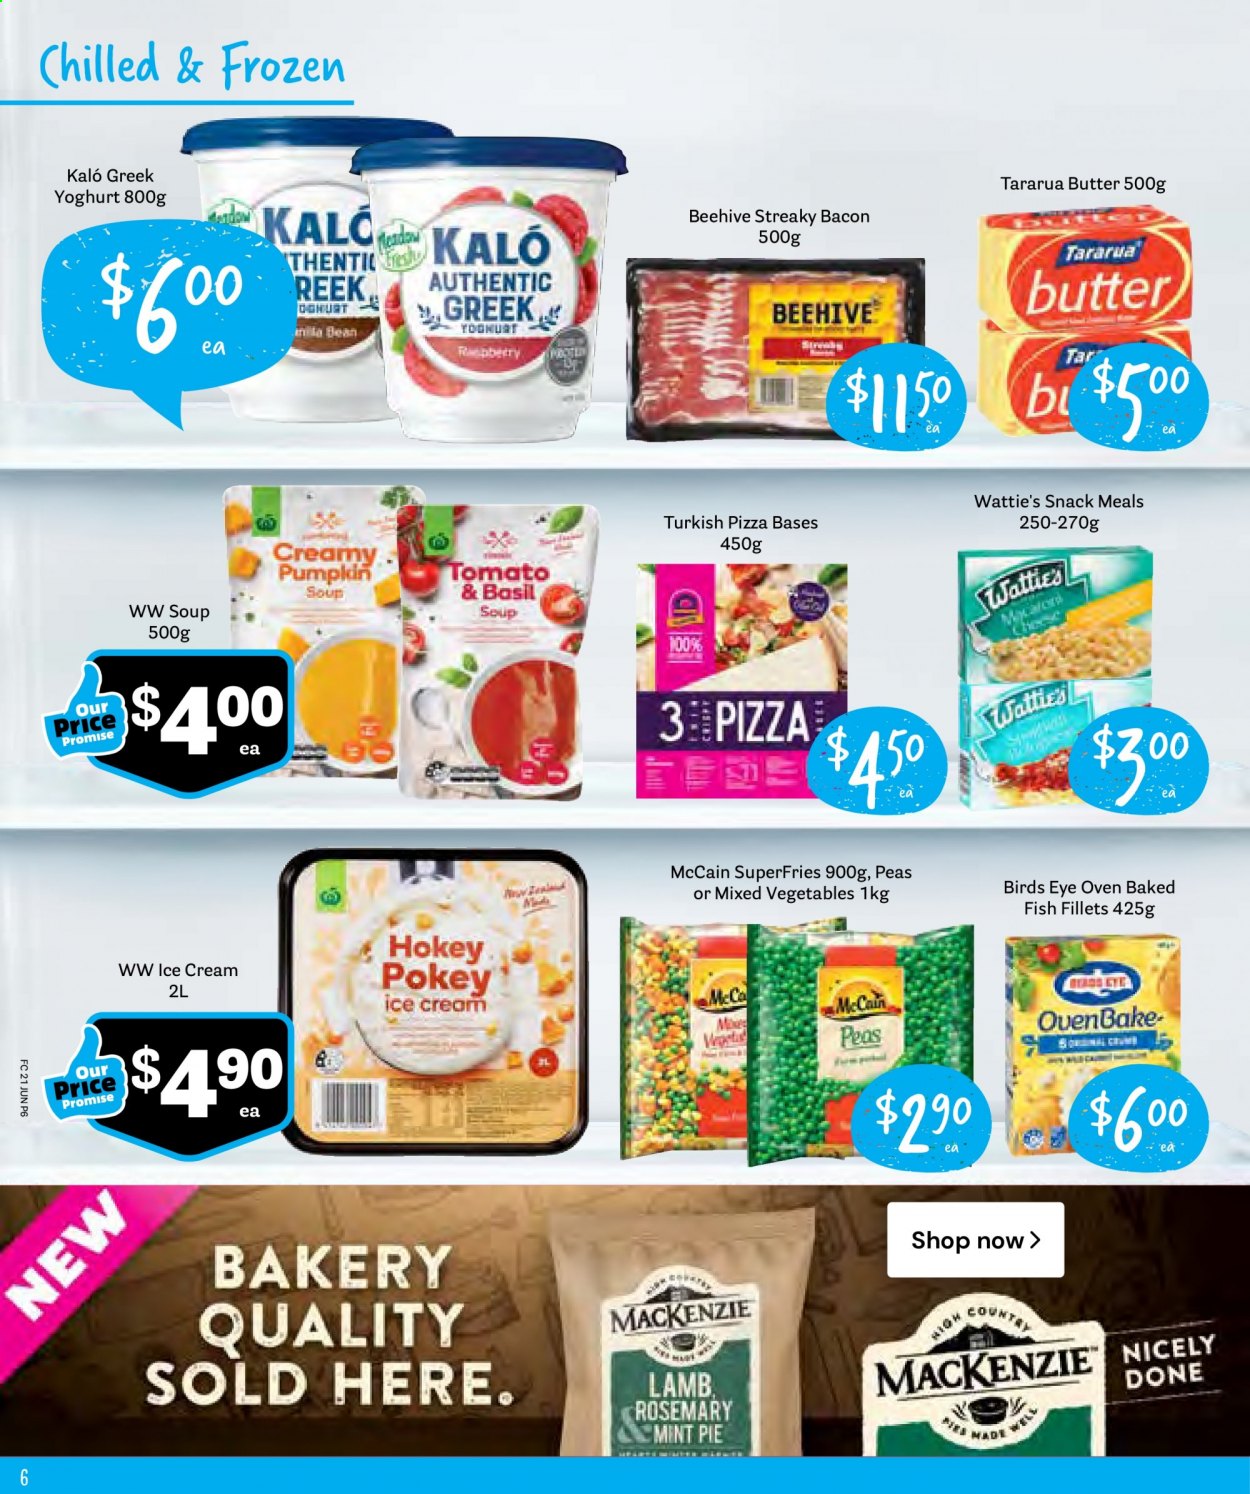 thumbnail - Fresh Choice mailer - 21.06.2021 - 27.06.2021 - Sales products - pie, peas, fish fillets, fish, soup, Bird's Eye, Wattie's, bacon, streaky bacon, greek yoghurt, yoghurt, butter, pizza dough, ice cream, mixed vegetables, McCain, potato fries, snack, rosemary. Page 6.